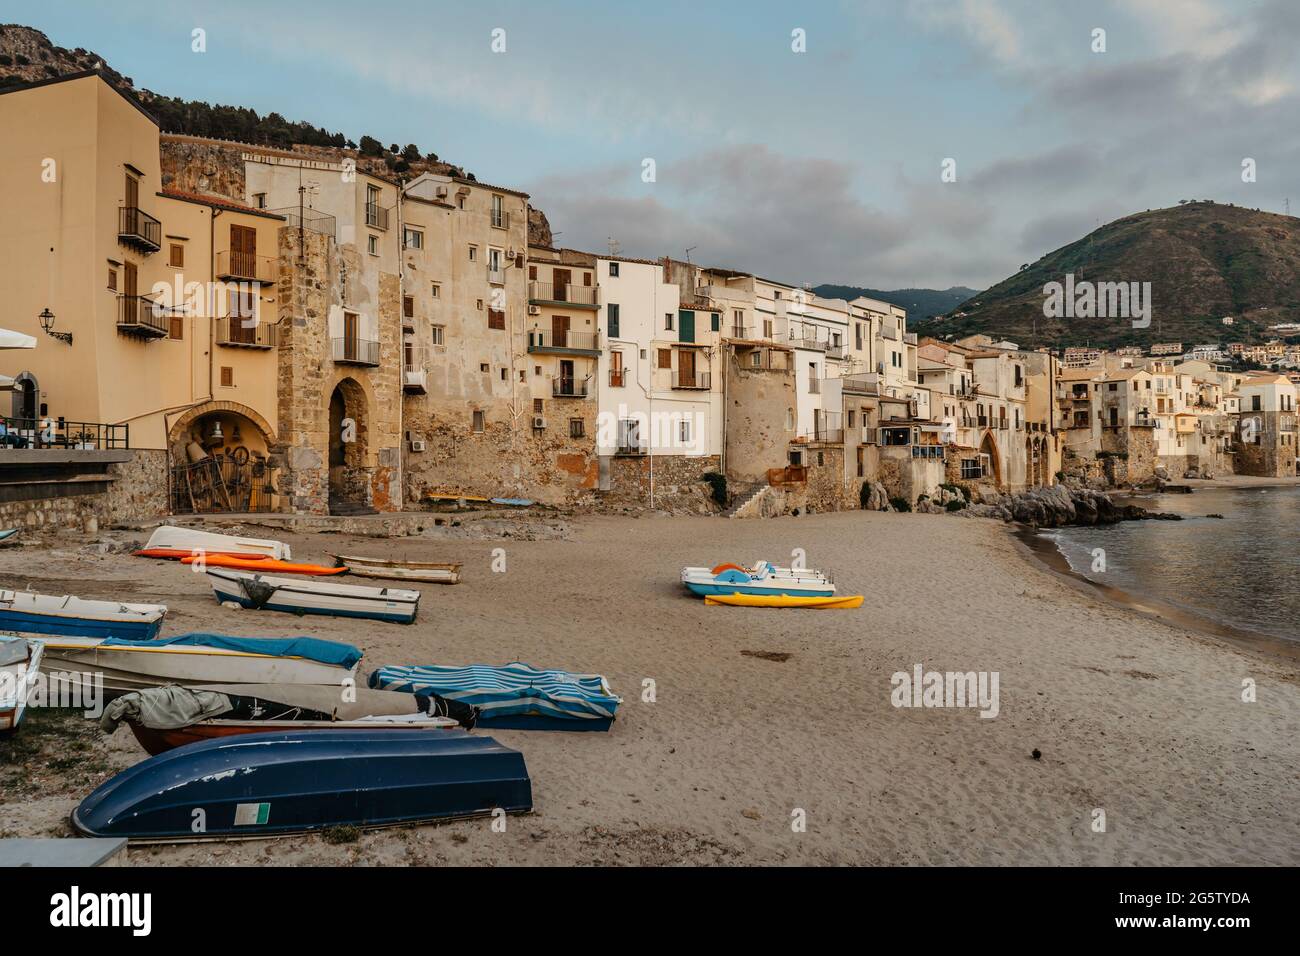 Beautiful old harbor with wooden fishing boats,colorful waterfront stone houses and sandy beach in Cefalu, Sicily, Italy.Attractive summer cityscape, Stock Photo